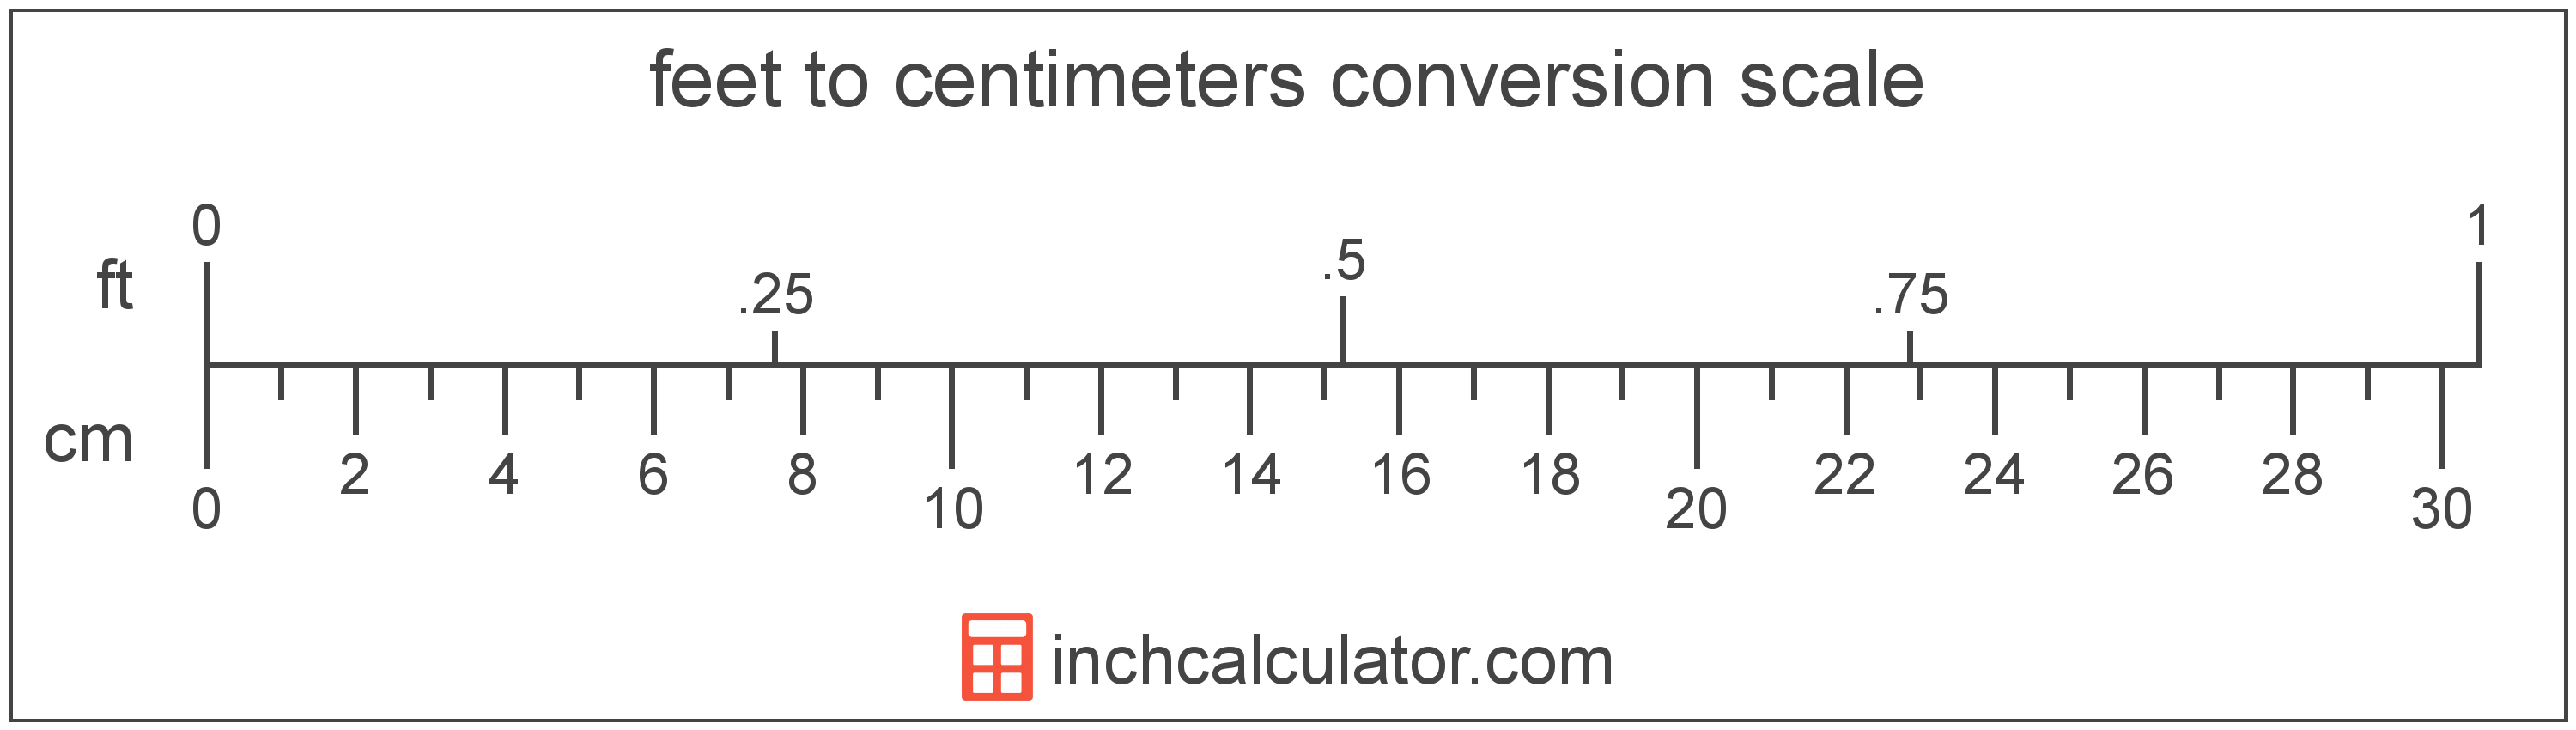 stap in Van Tarief Feet to cm Conversion (ft to cm) - Inch Calculator